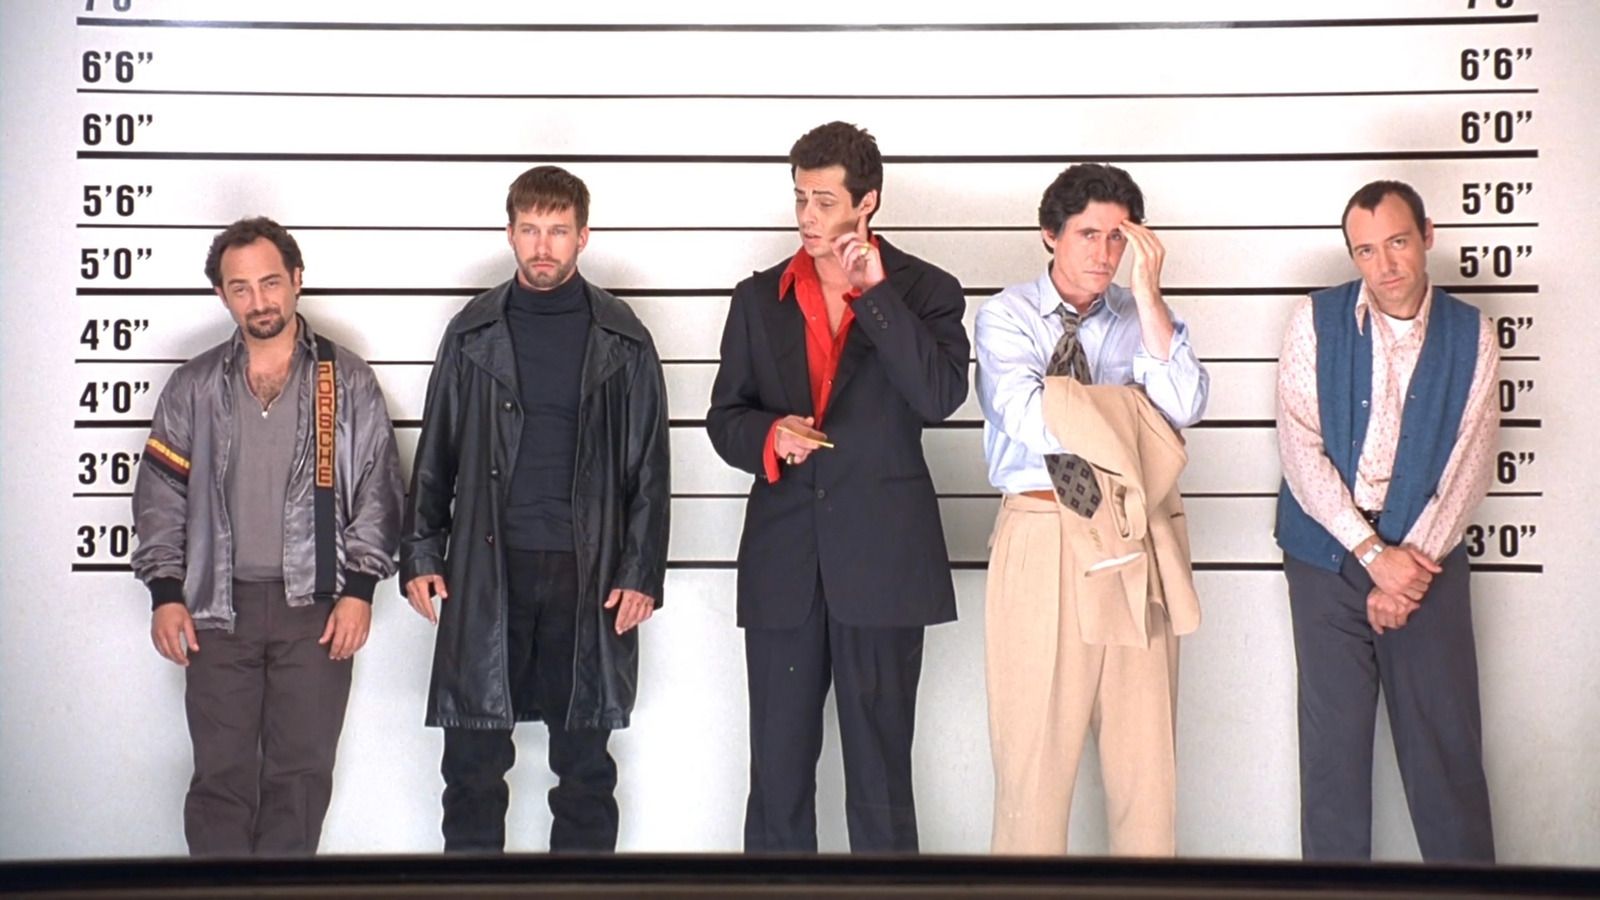 Keyser Soze, 'The Usual Suspects', Top 10 Memorable Movie-Character Names